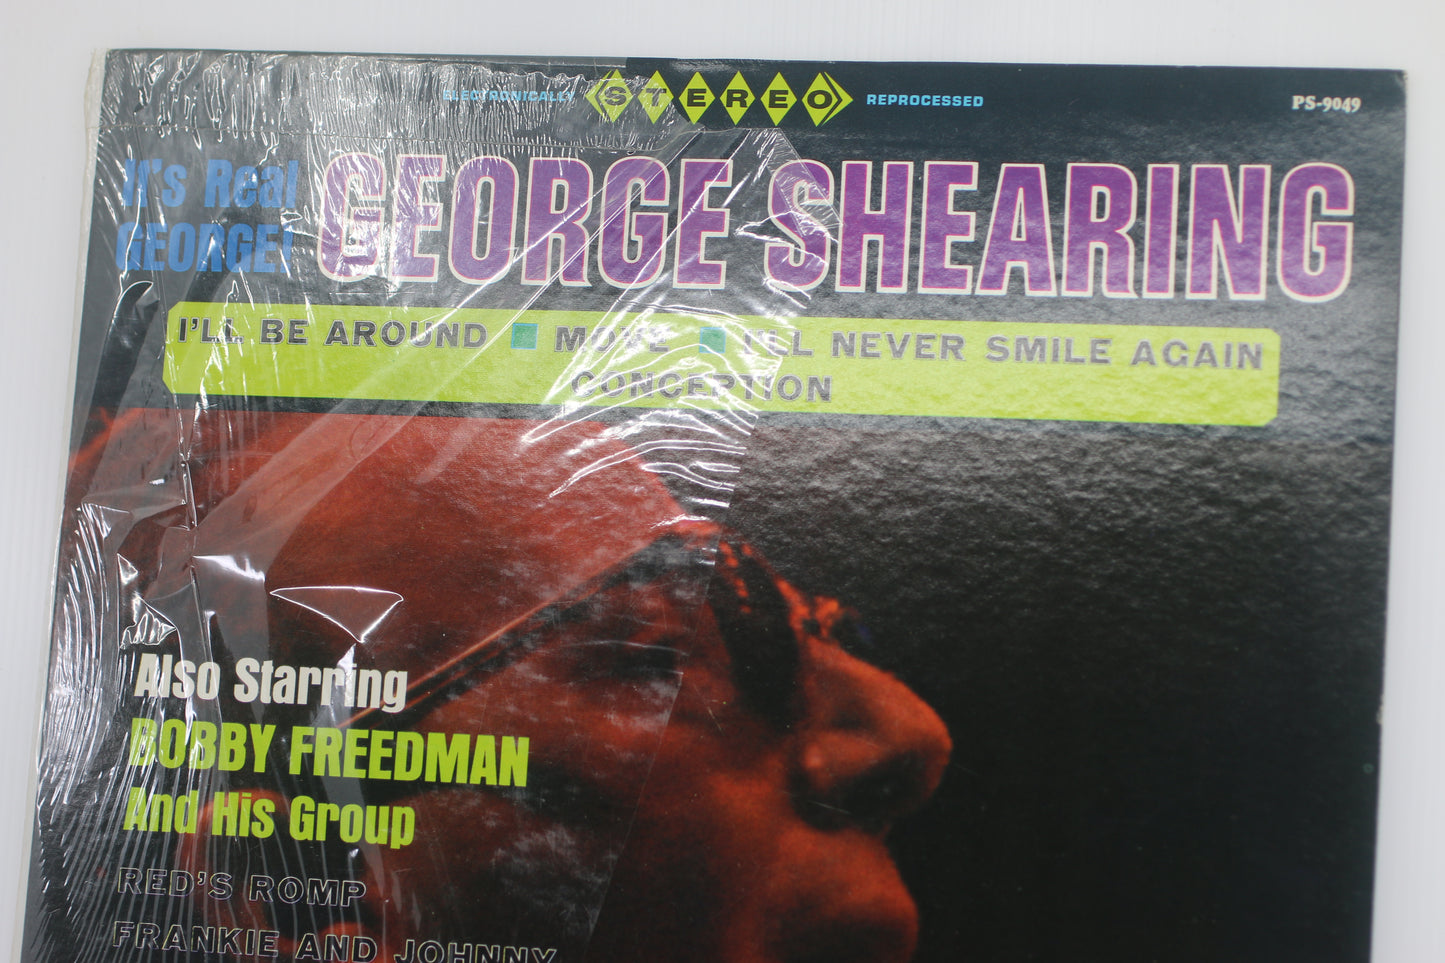 1965 George Shearing Its Real George Vinyl LP 33 Coronet Records CXS272 Jazz